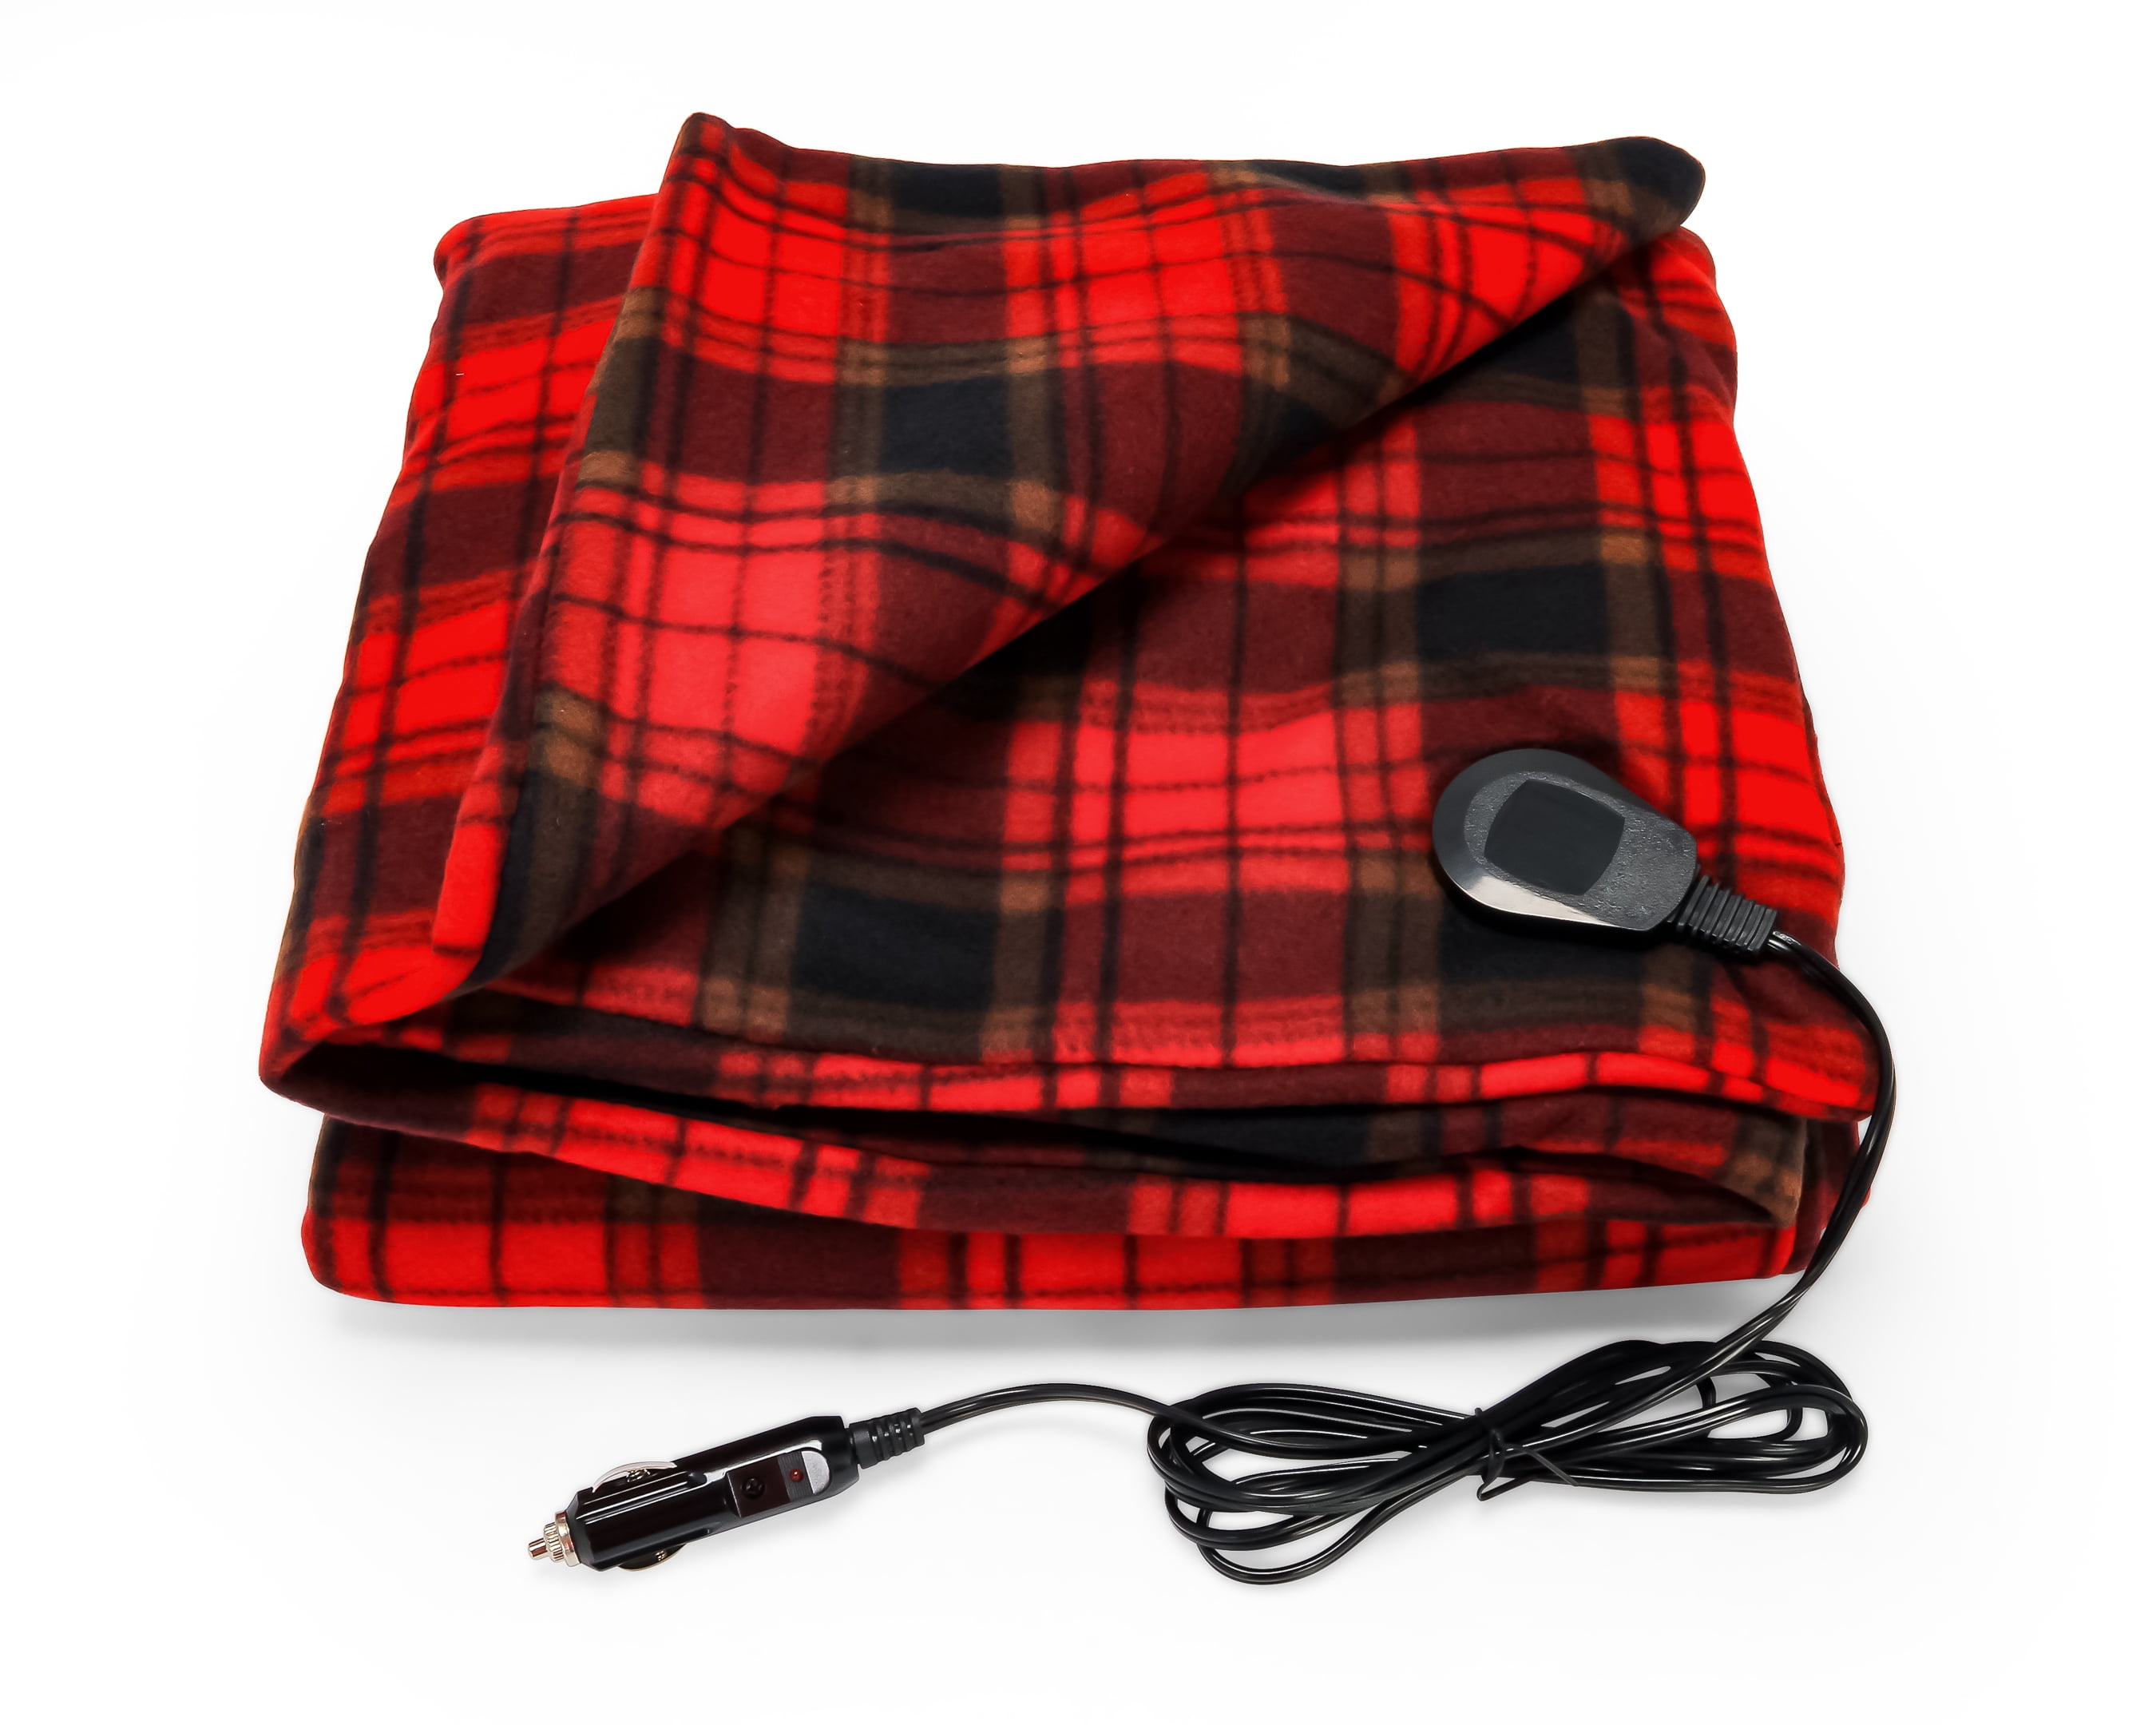 12 Volt Electric Fleece Constant Temperature Anti-Overheat Heating Blanket for SUV Vehicle Truck Boats RV Winter Cold Weather Travel Camping Use Navy JanTeel Car Heated Blanket 